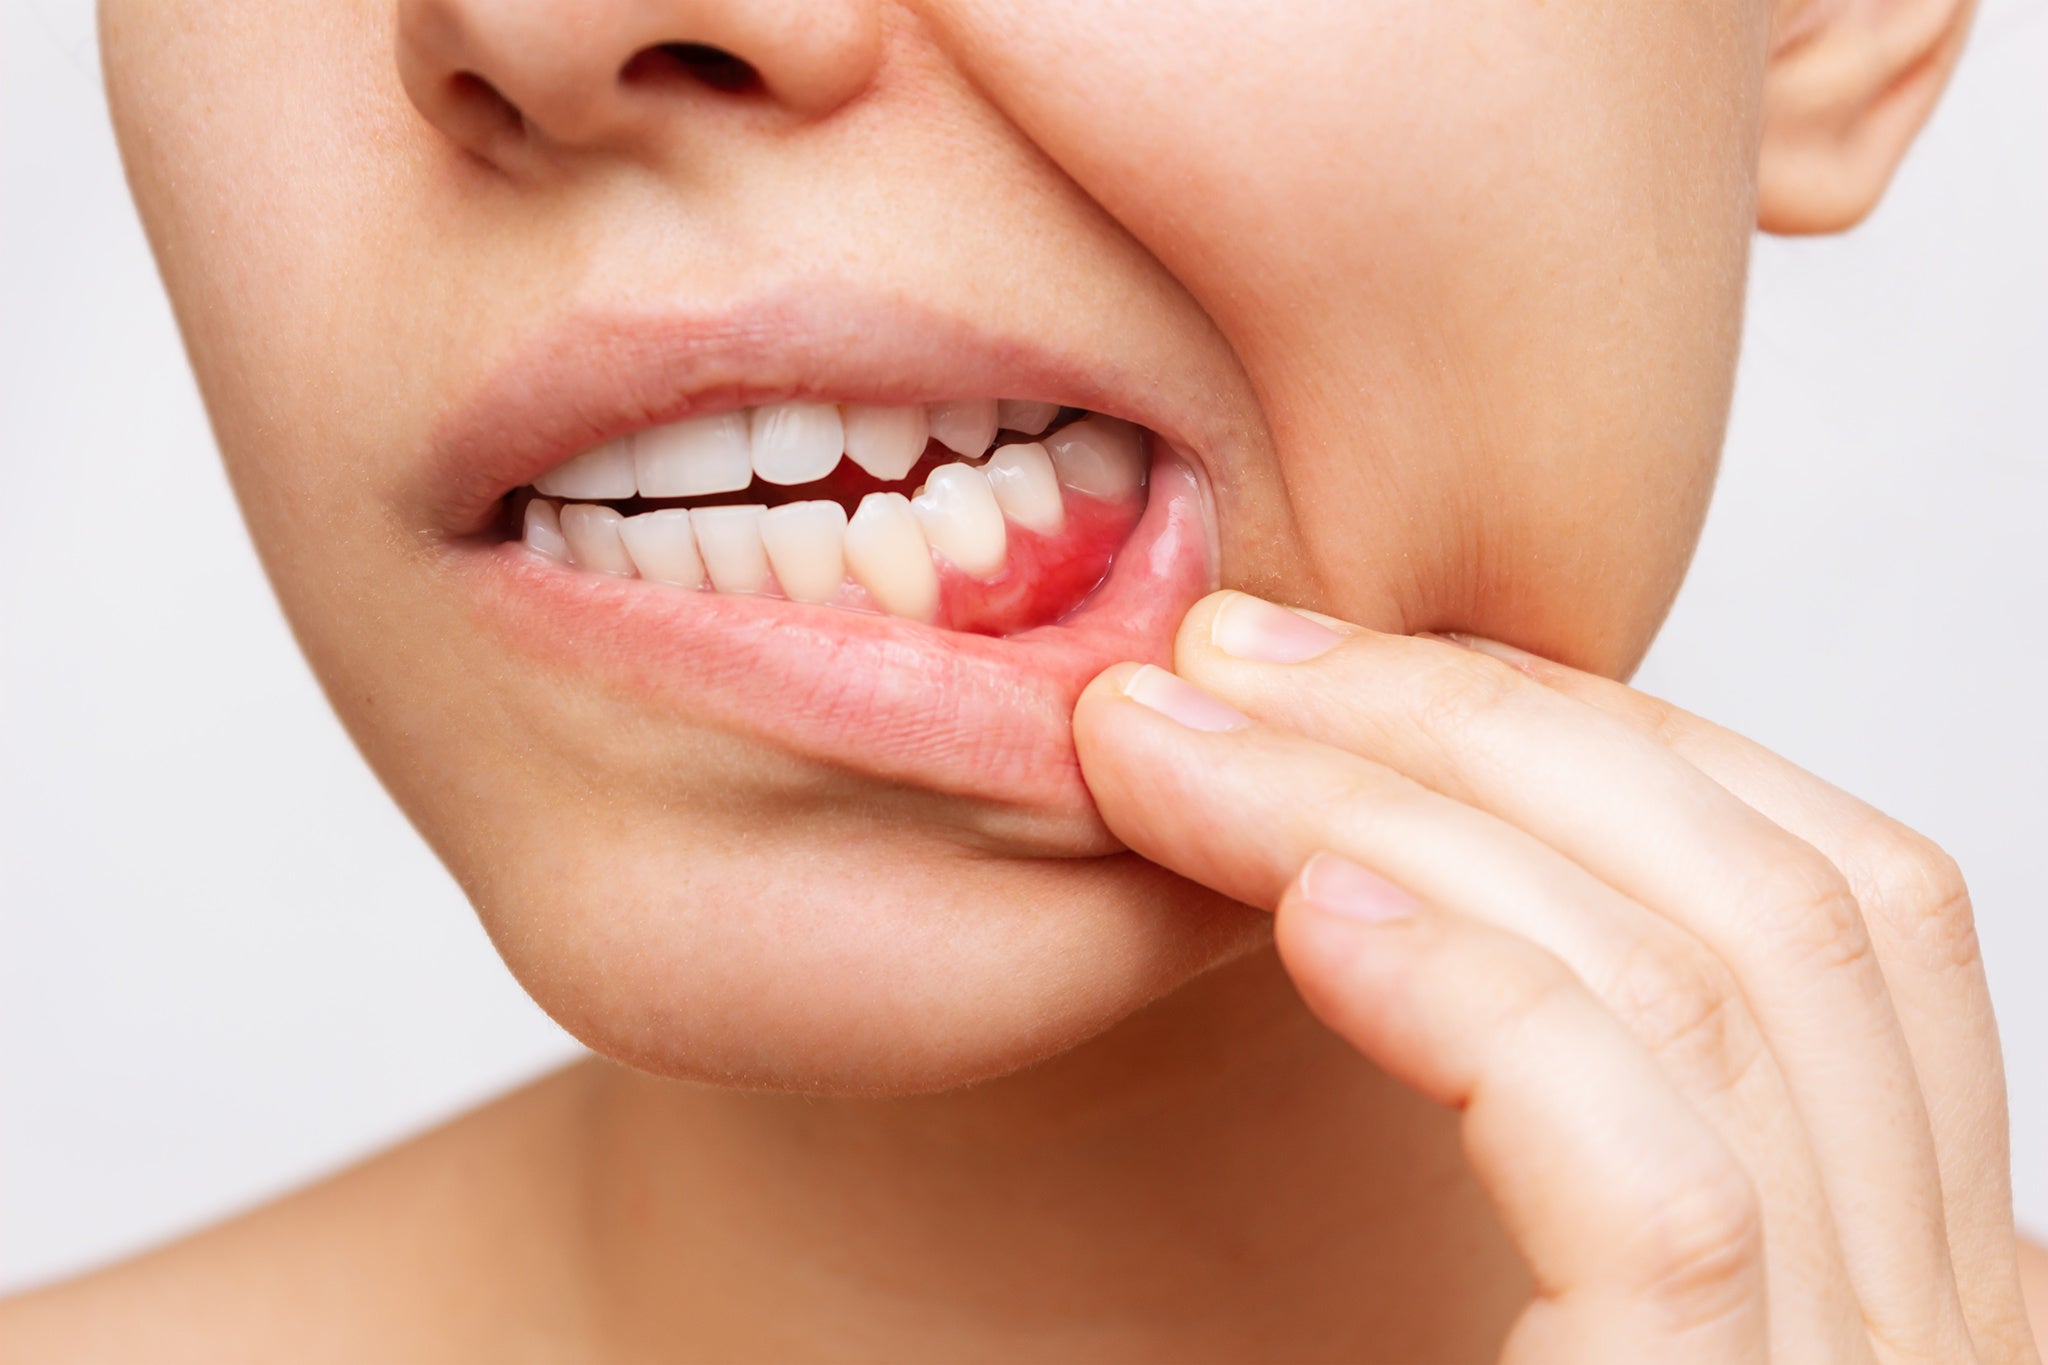 Inflammatory Periodontal Disease: What the Science Says